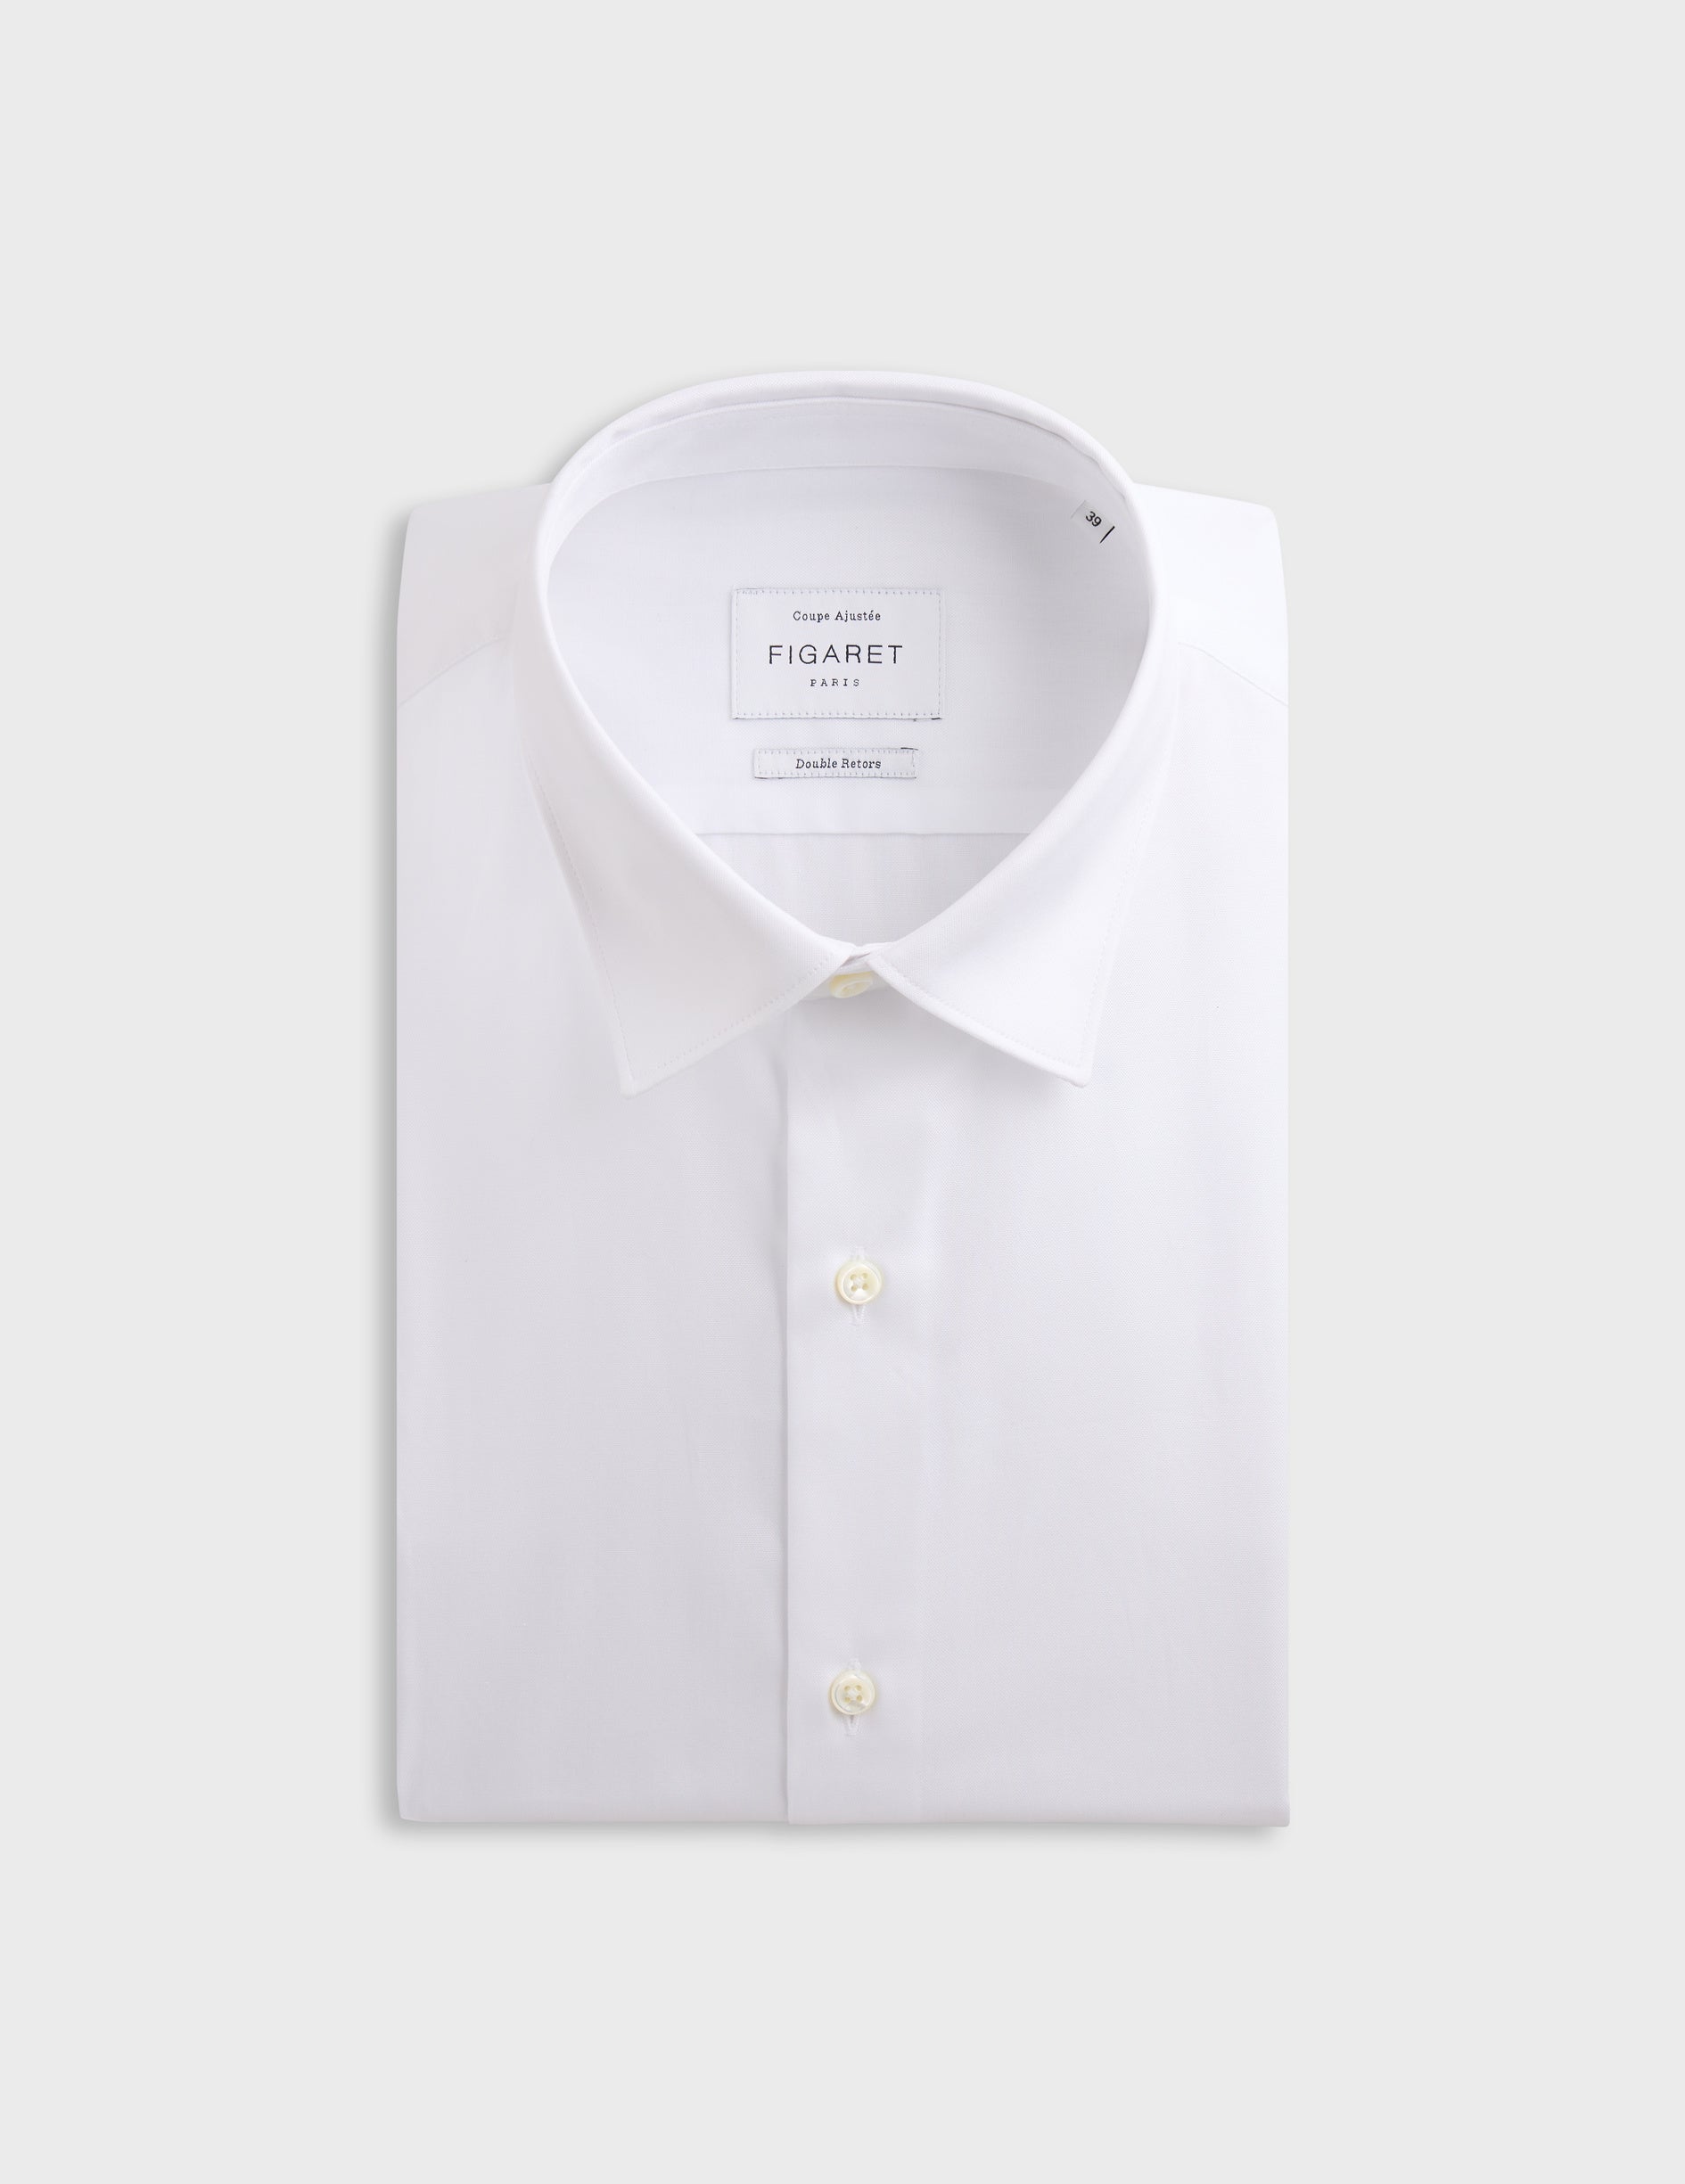 Fitted white shirt - pin point - Figaret Collar